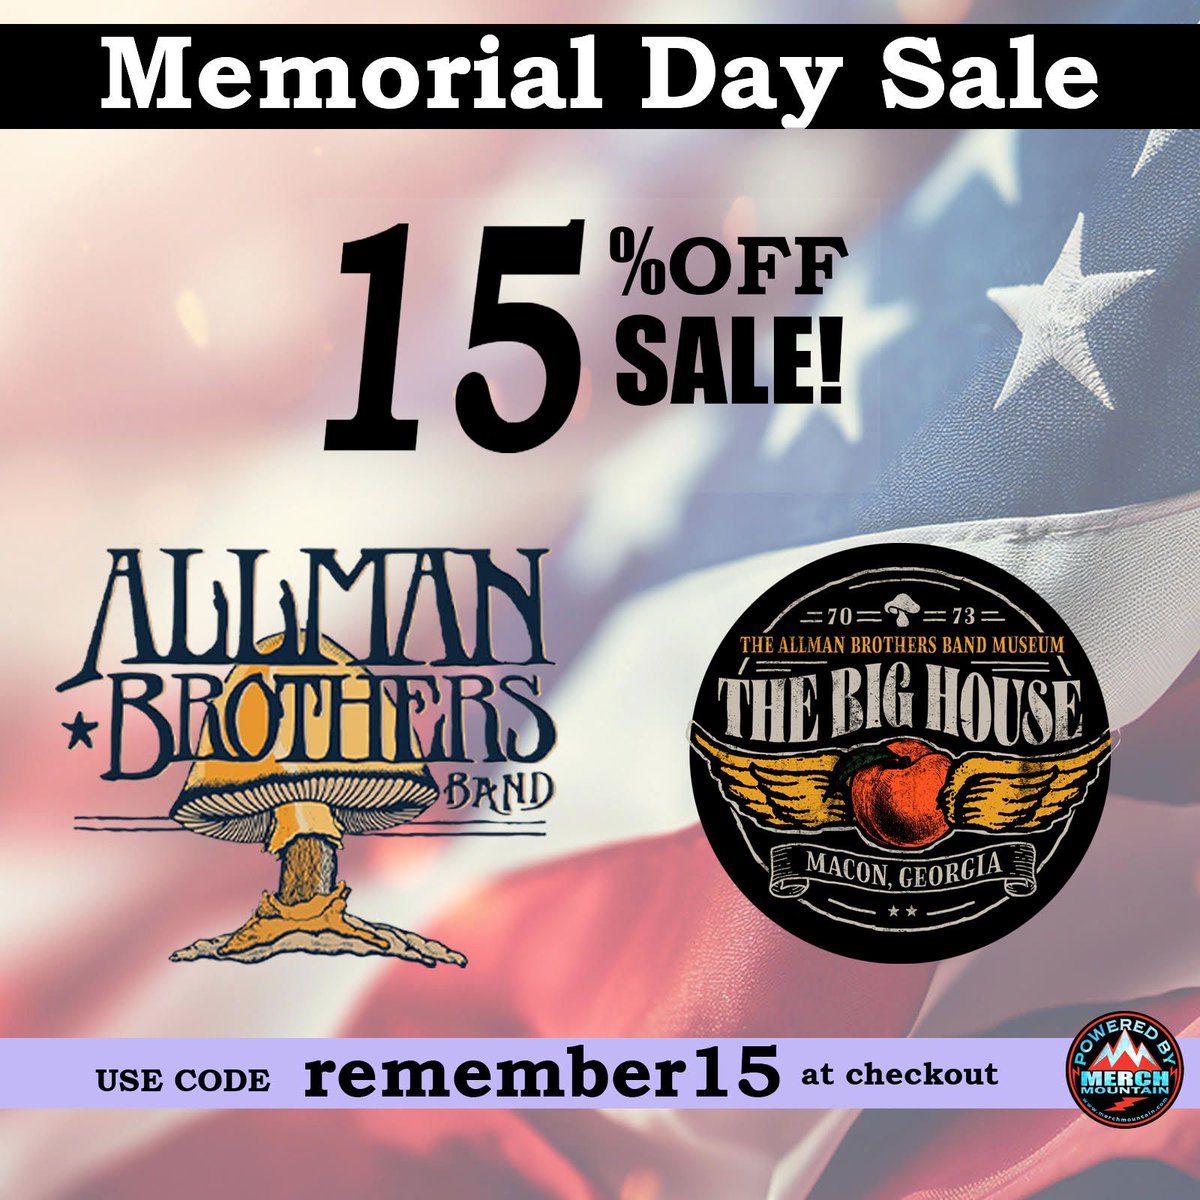 Happy Memorial Day weekend everyone! The Big House Museum gift shop is celebrating with a 15% off sale - good for everything in the shop! Use the code remember15 at checkout. buff.ly/3Te8ENR